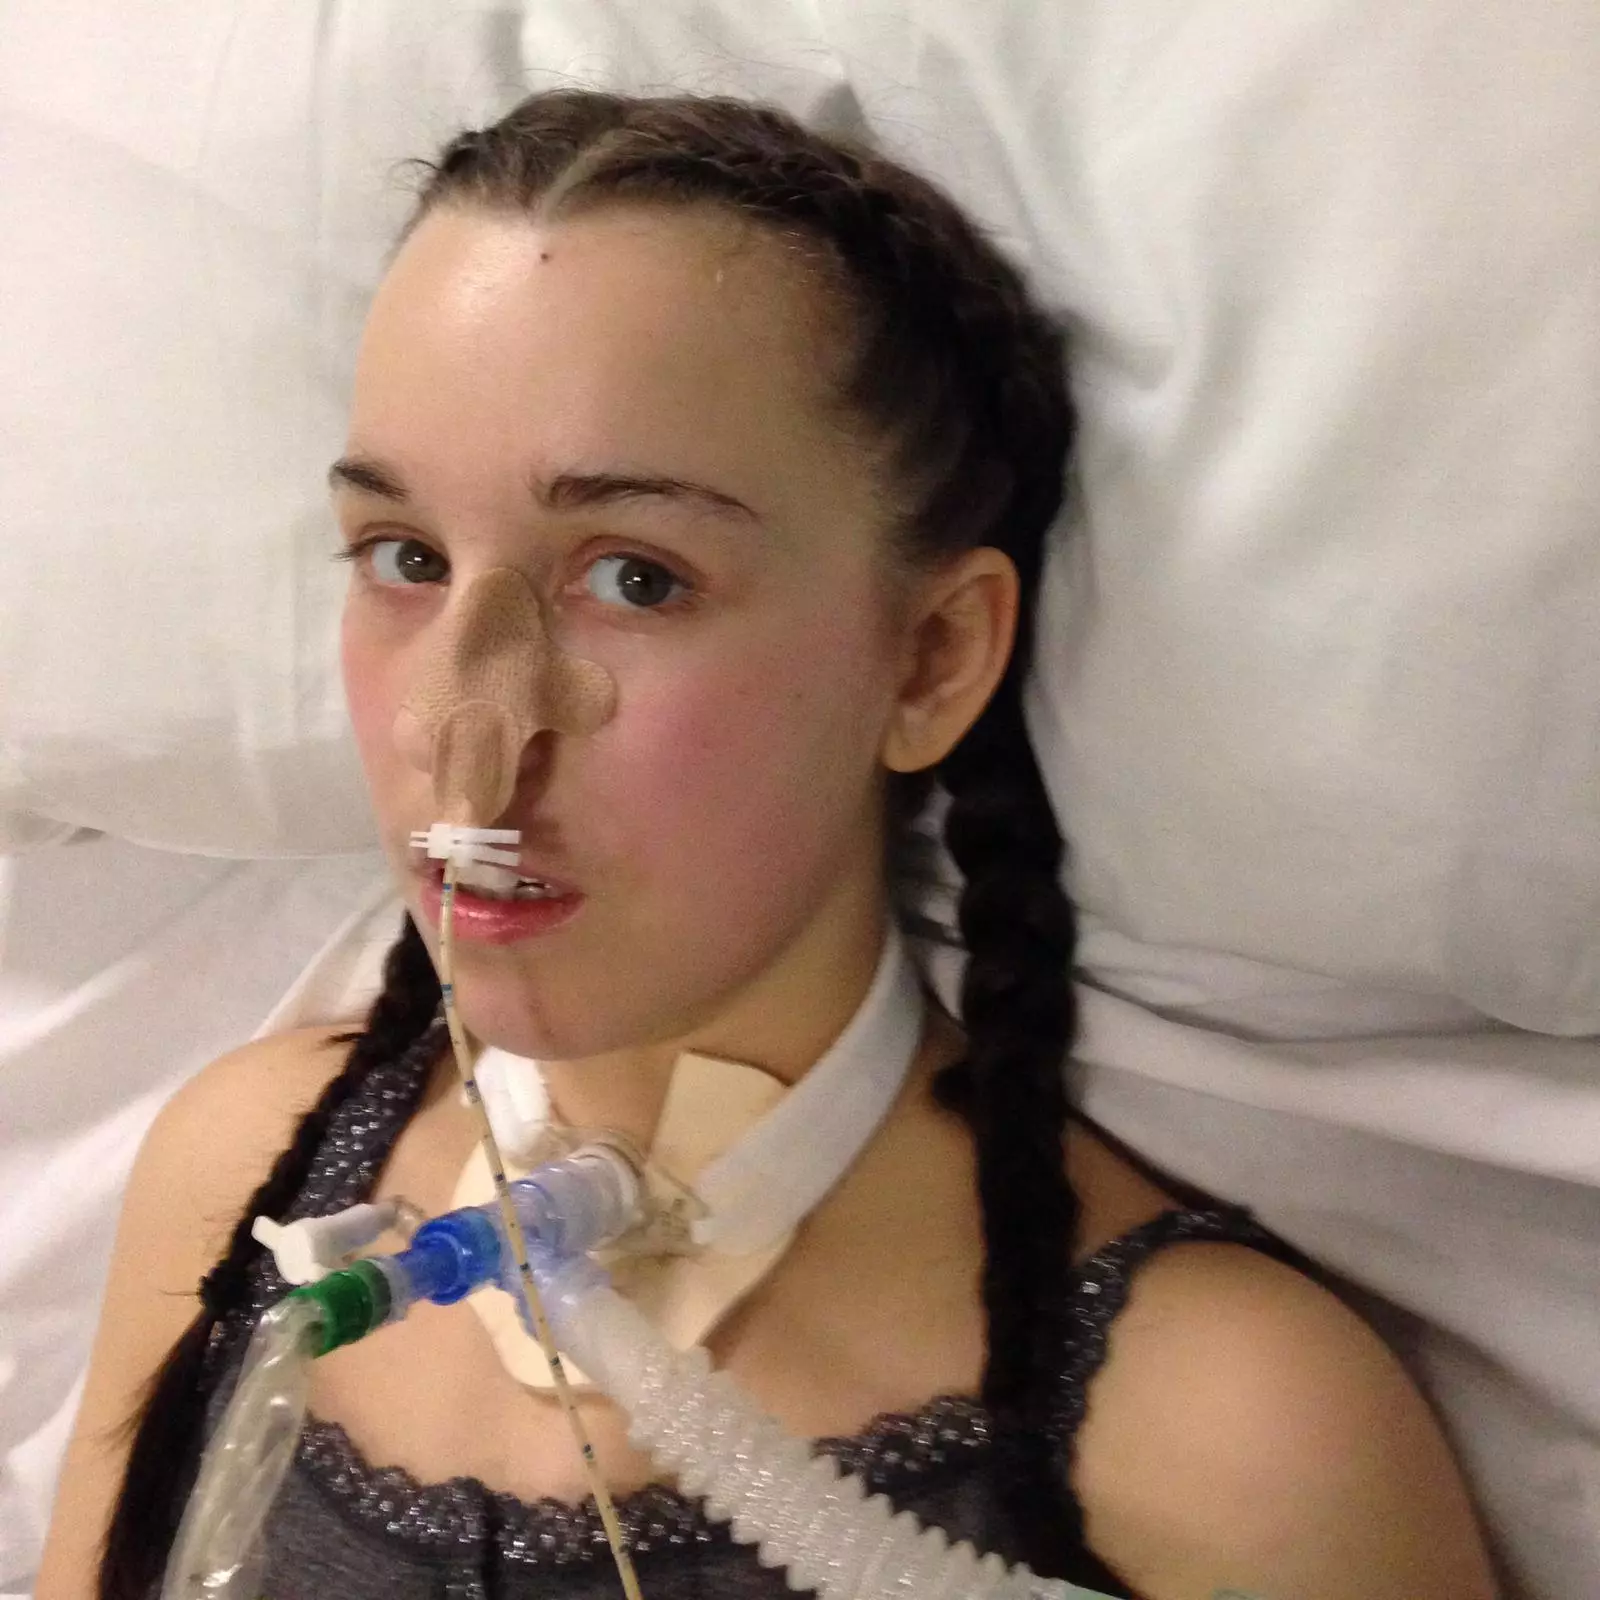 Rachael was placed on a ventilator just three days after symptoms first set in.